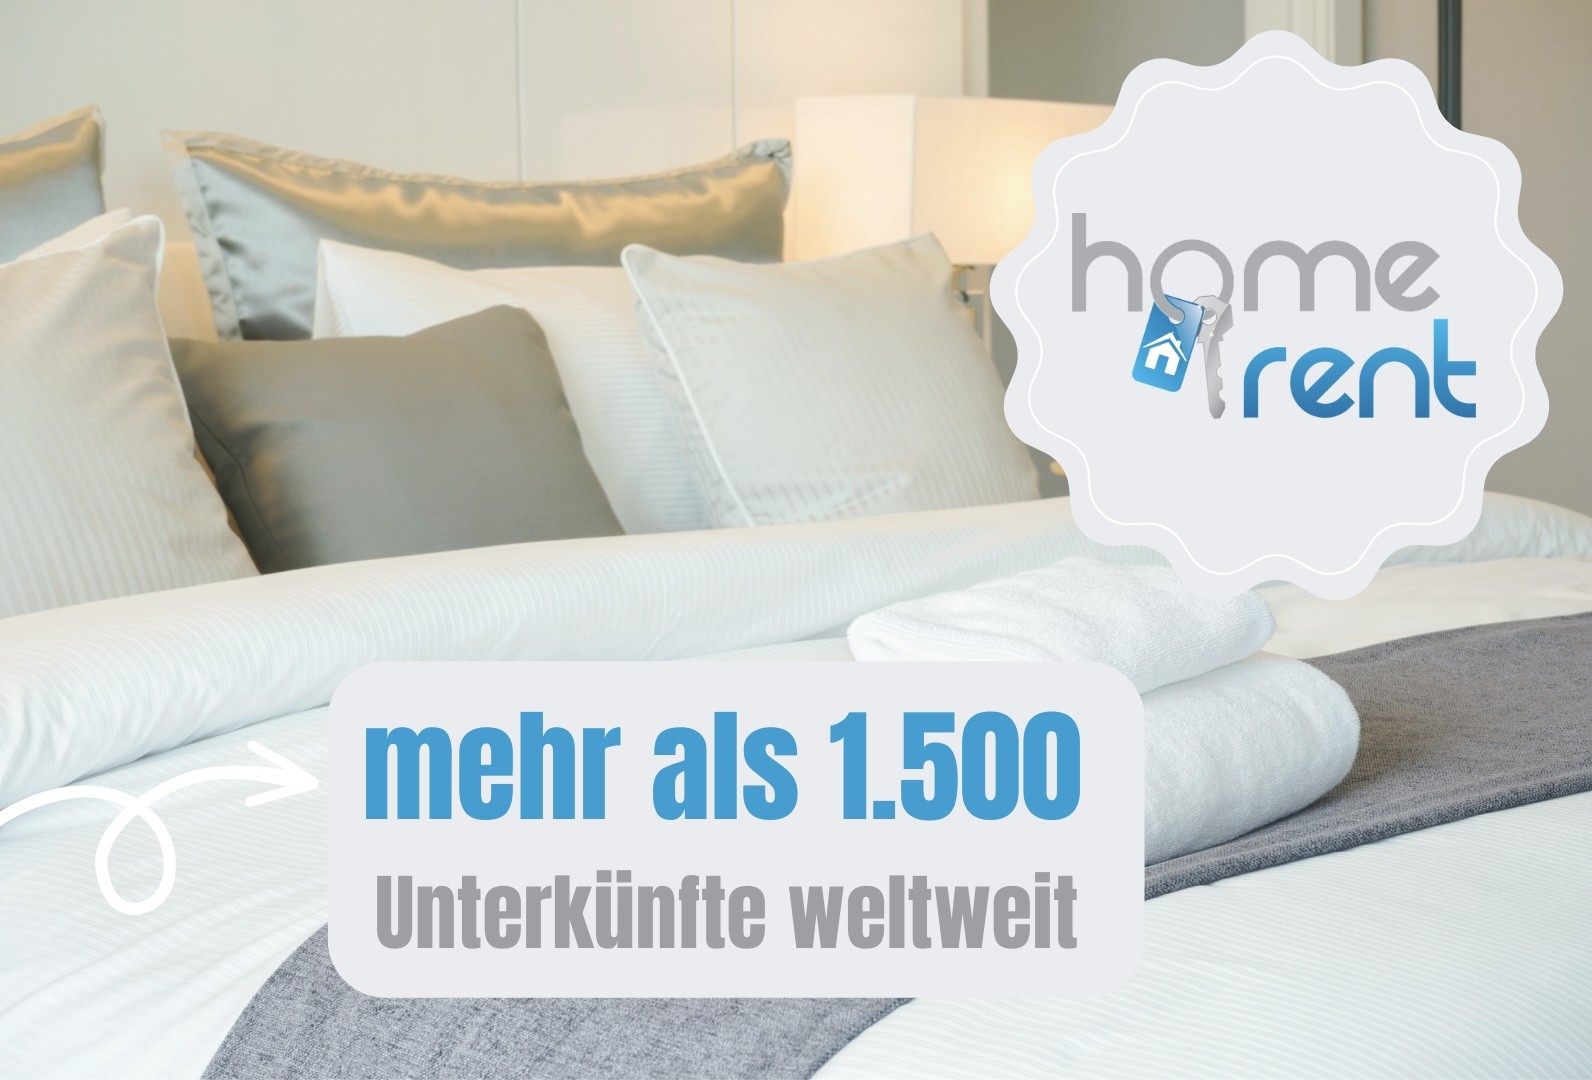 Monteurwohnung HomeRent in Eitorf &amp; Umgebung Homerent Immobilien GmbH 53783 1714054307662a64a3ac221